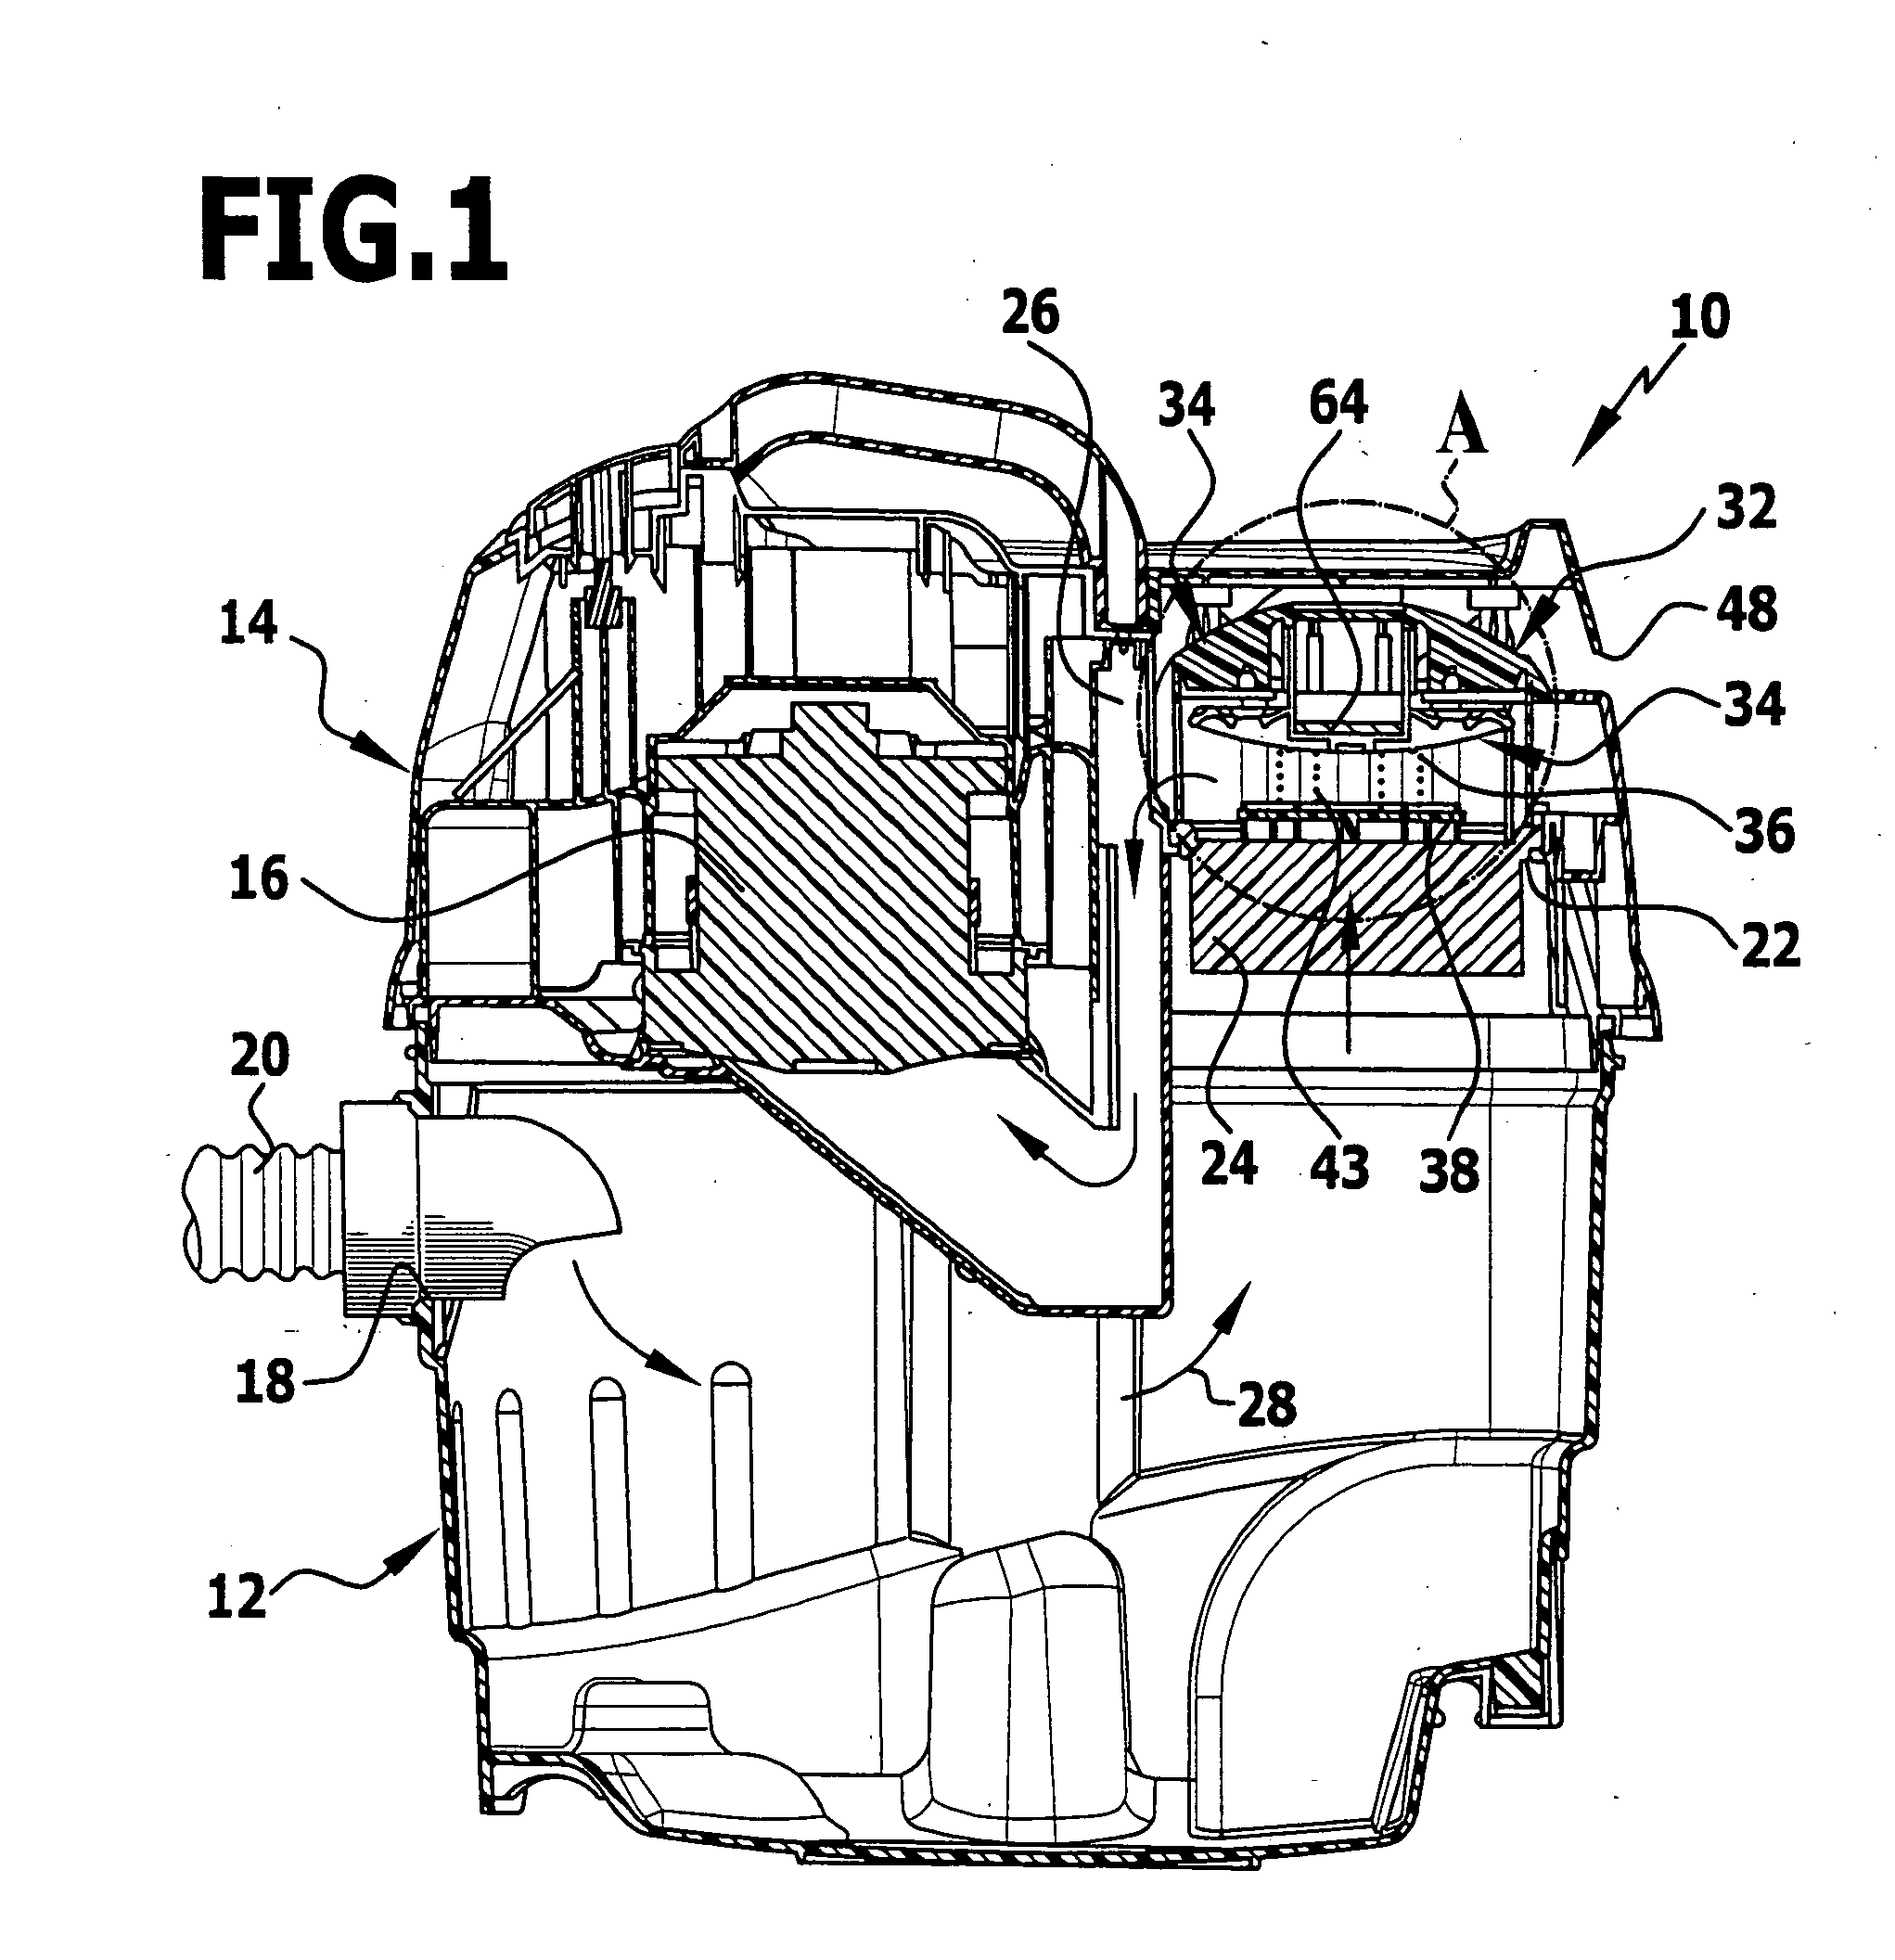 Method for cleaning the filters of a vacuum cleaner and vacuum cleaner for carrying out the method